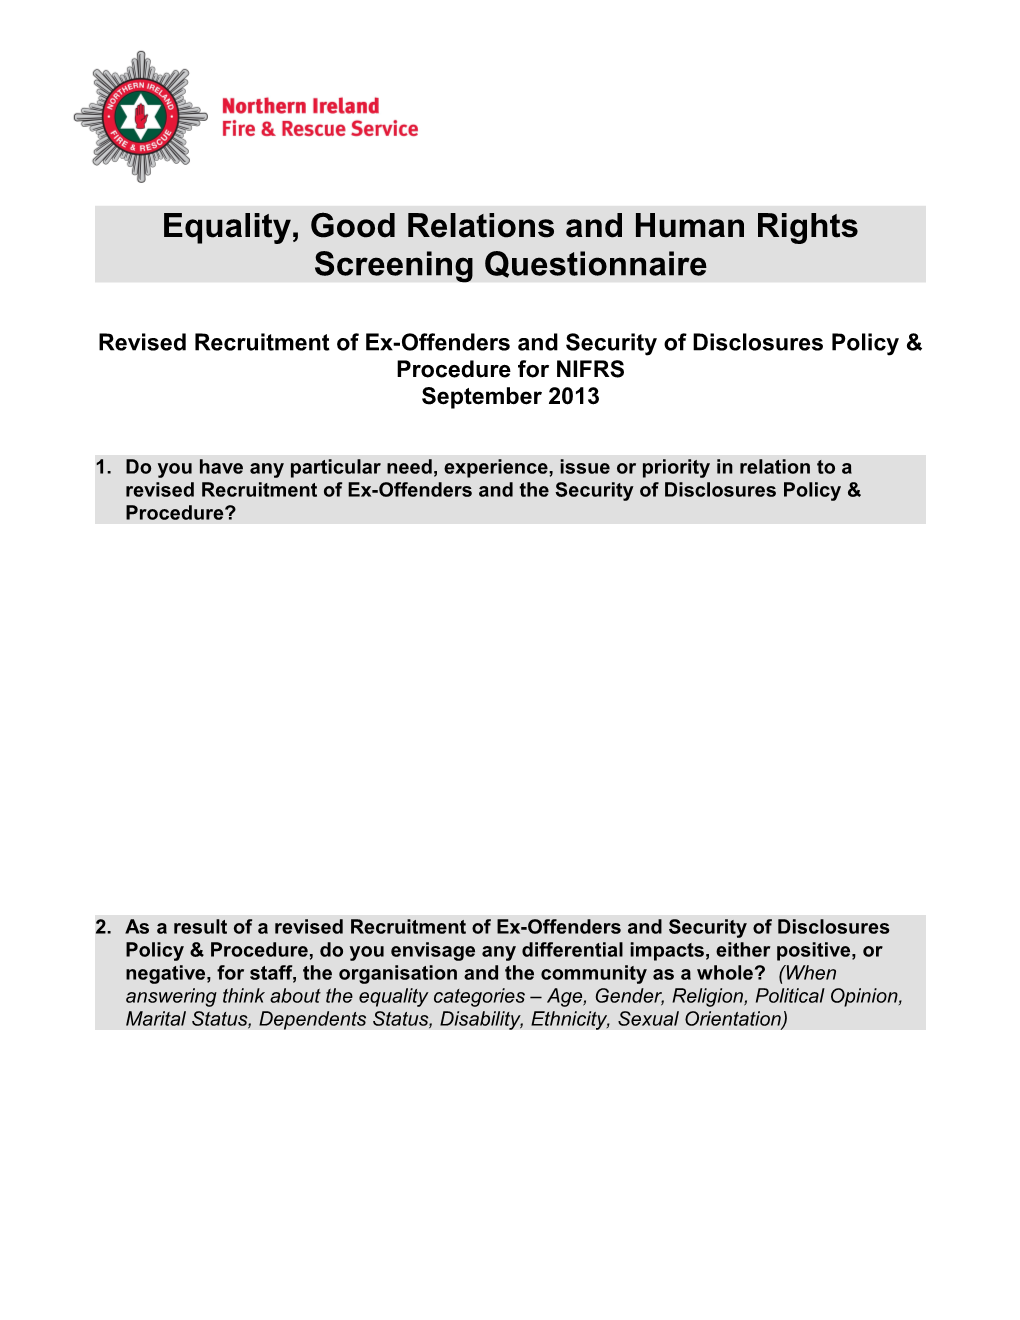 Equality, Good Relations and Human Rightsscreening Questionnaire